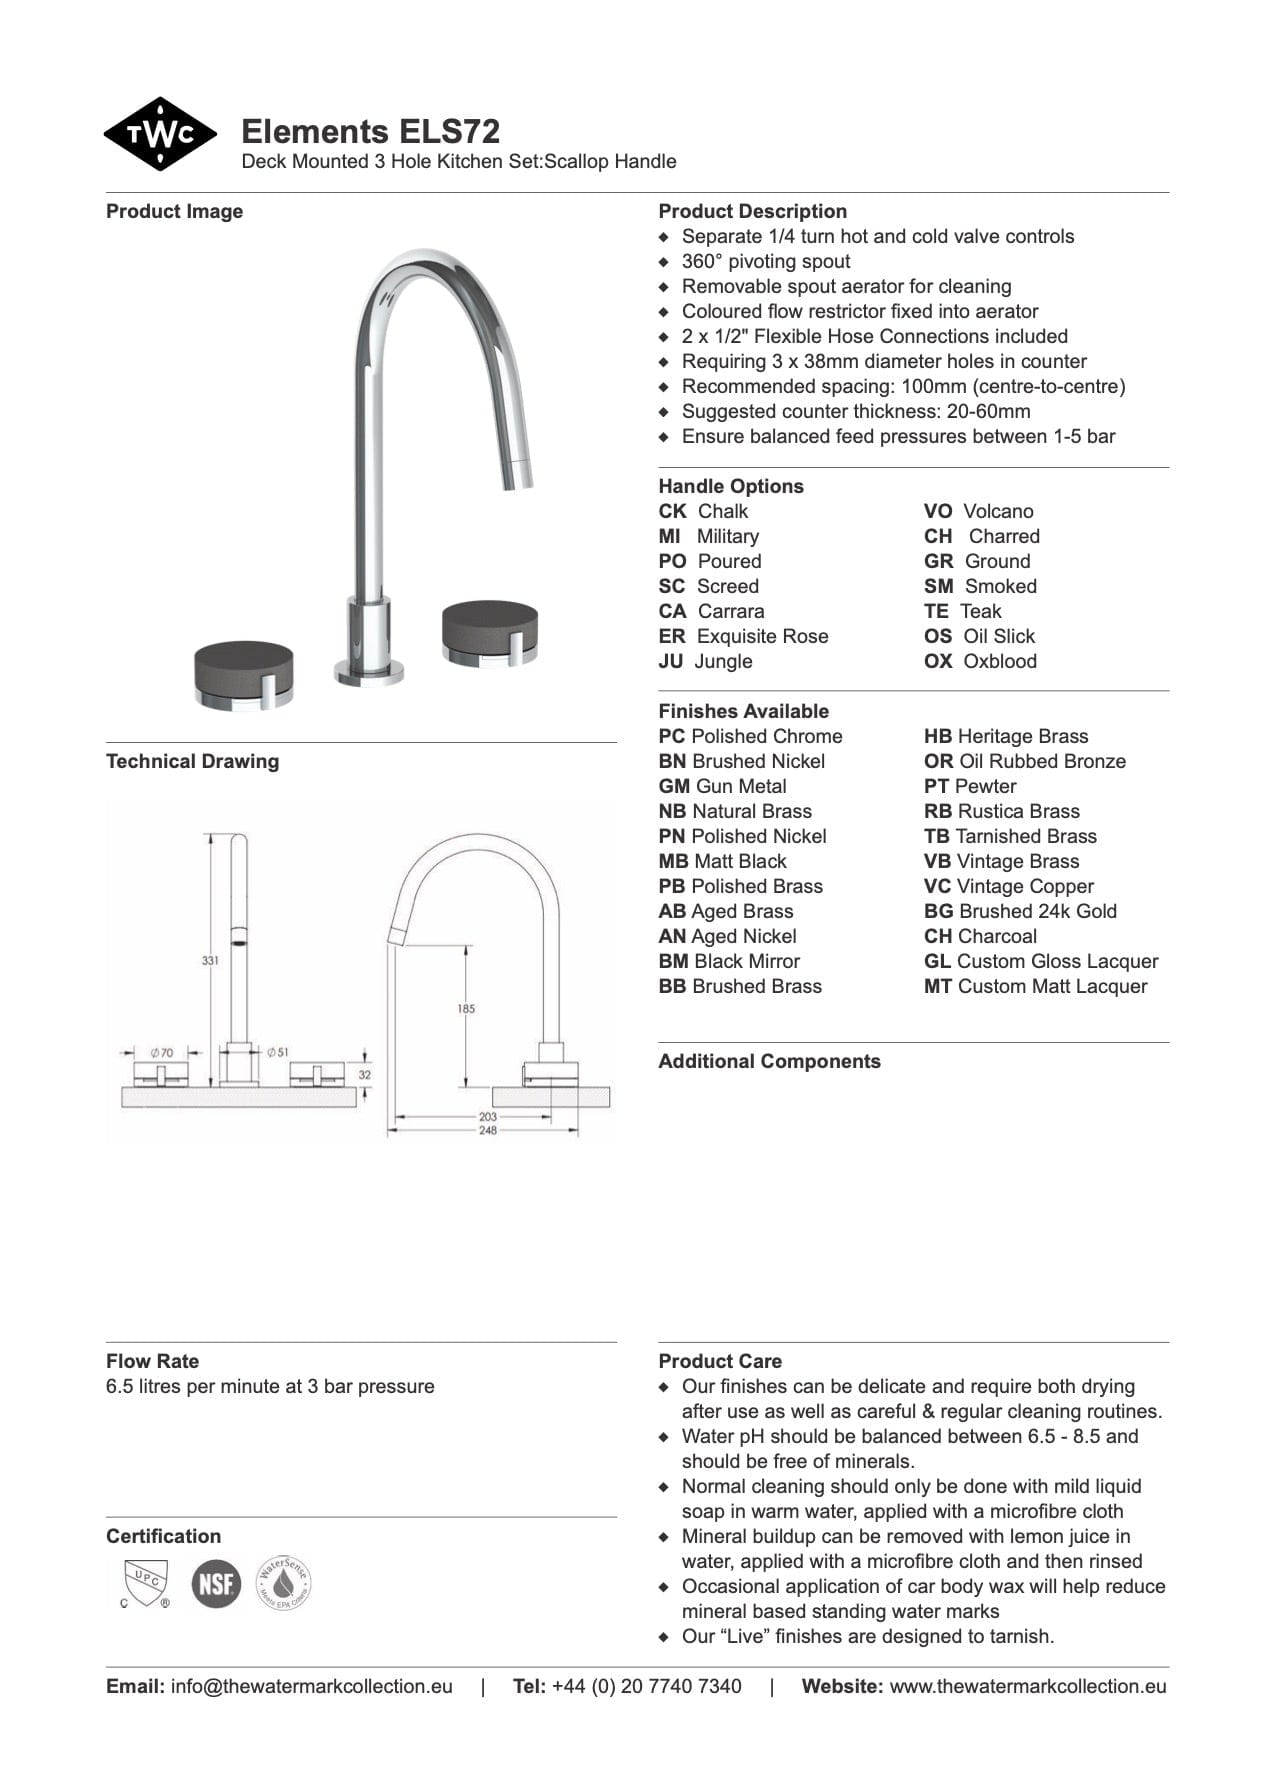 The Watermark Collection Kitchen Tap The Watermark Collection Elements 3 Hole Kitchen Set | Scallop Insert